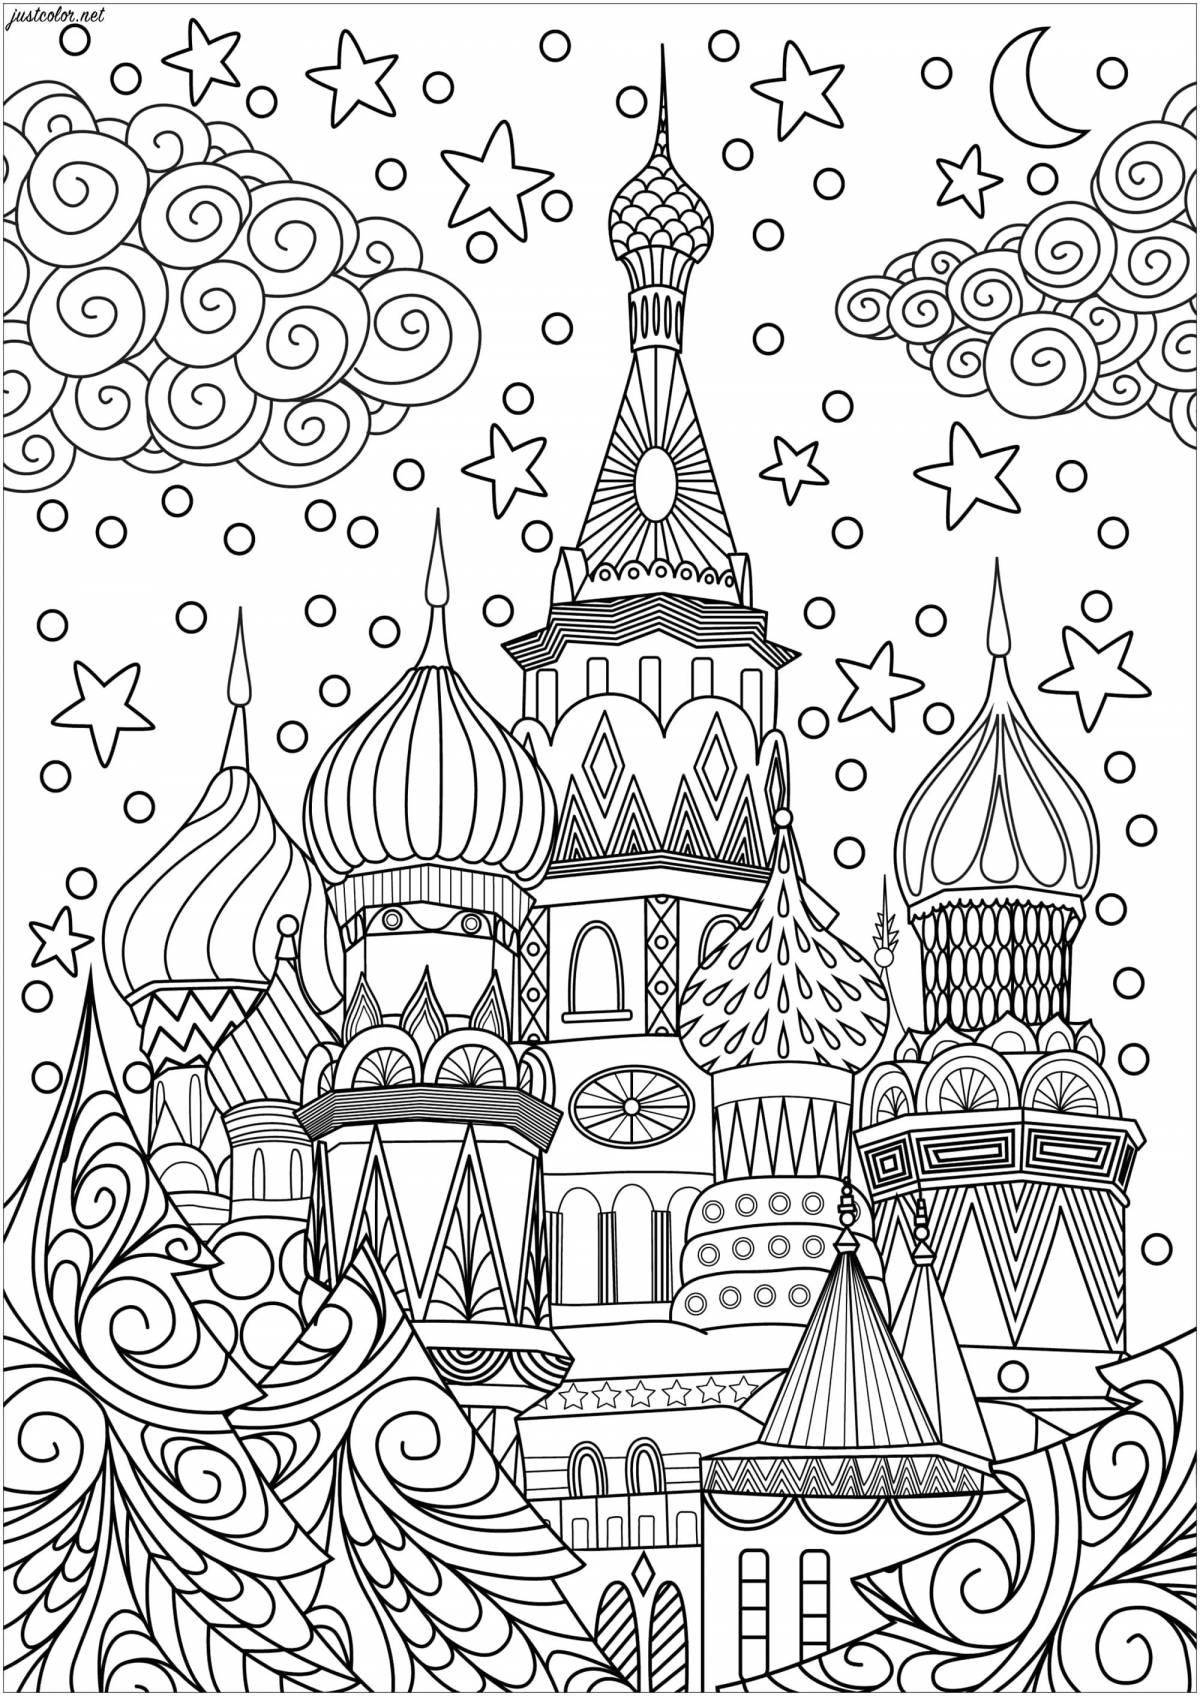 Fun coloring book red square for kids